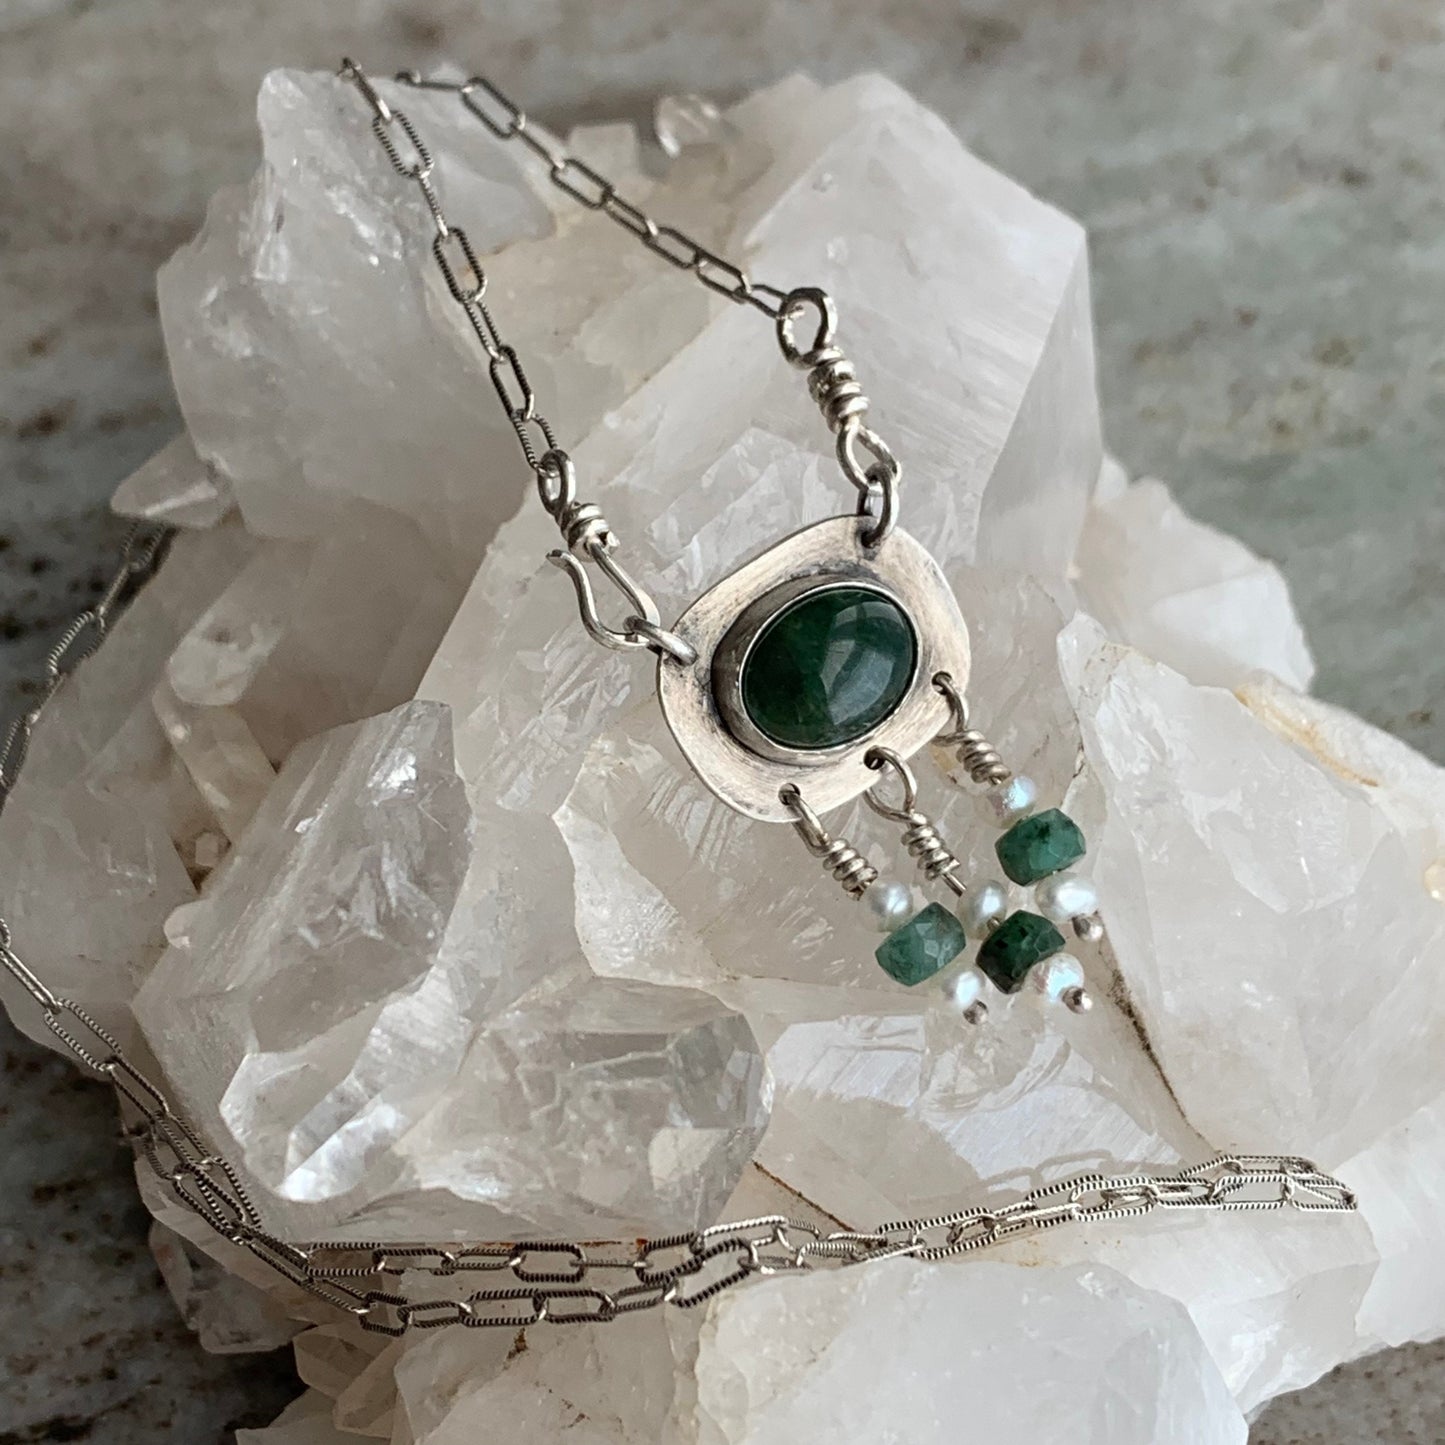 Moss agate pendant necklace - spring jewelry - boho necklace for women - delicate chain - earthy green gemstone - handmade